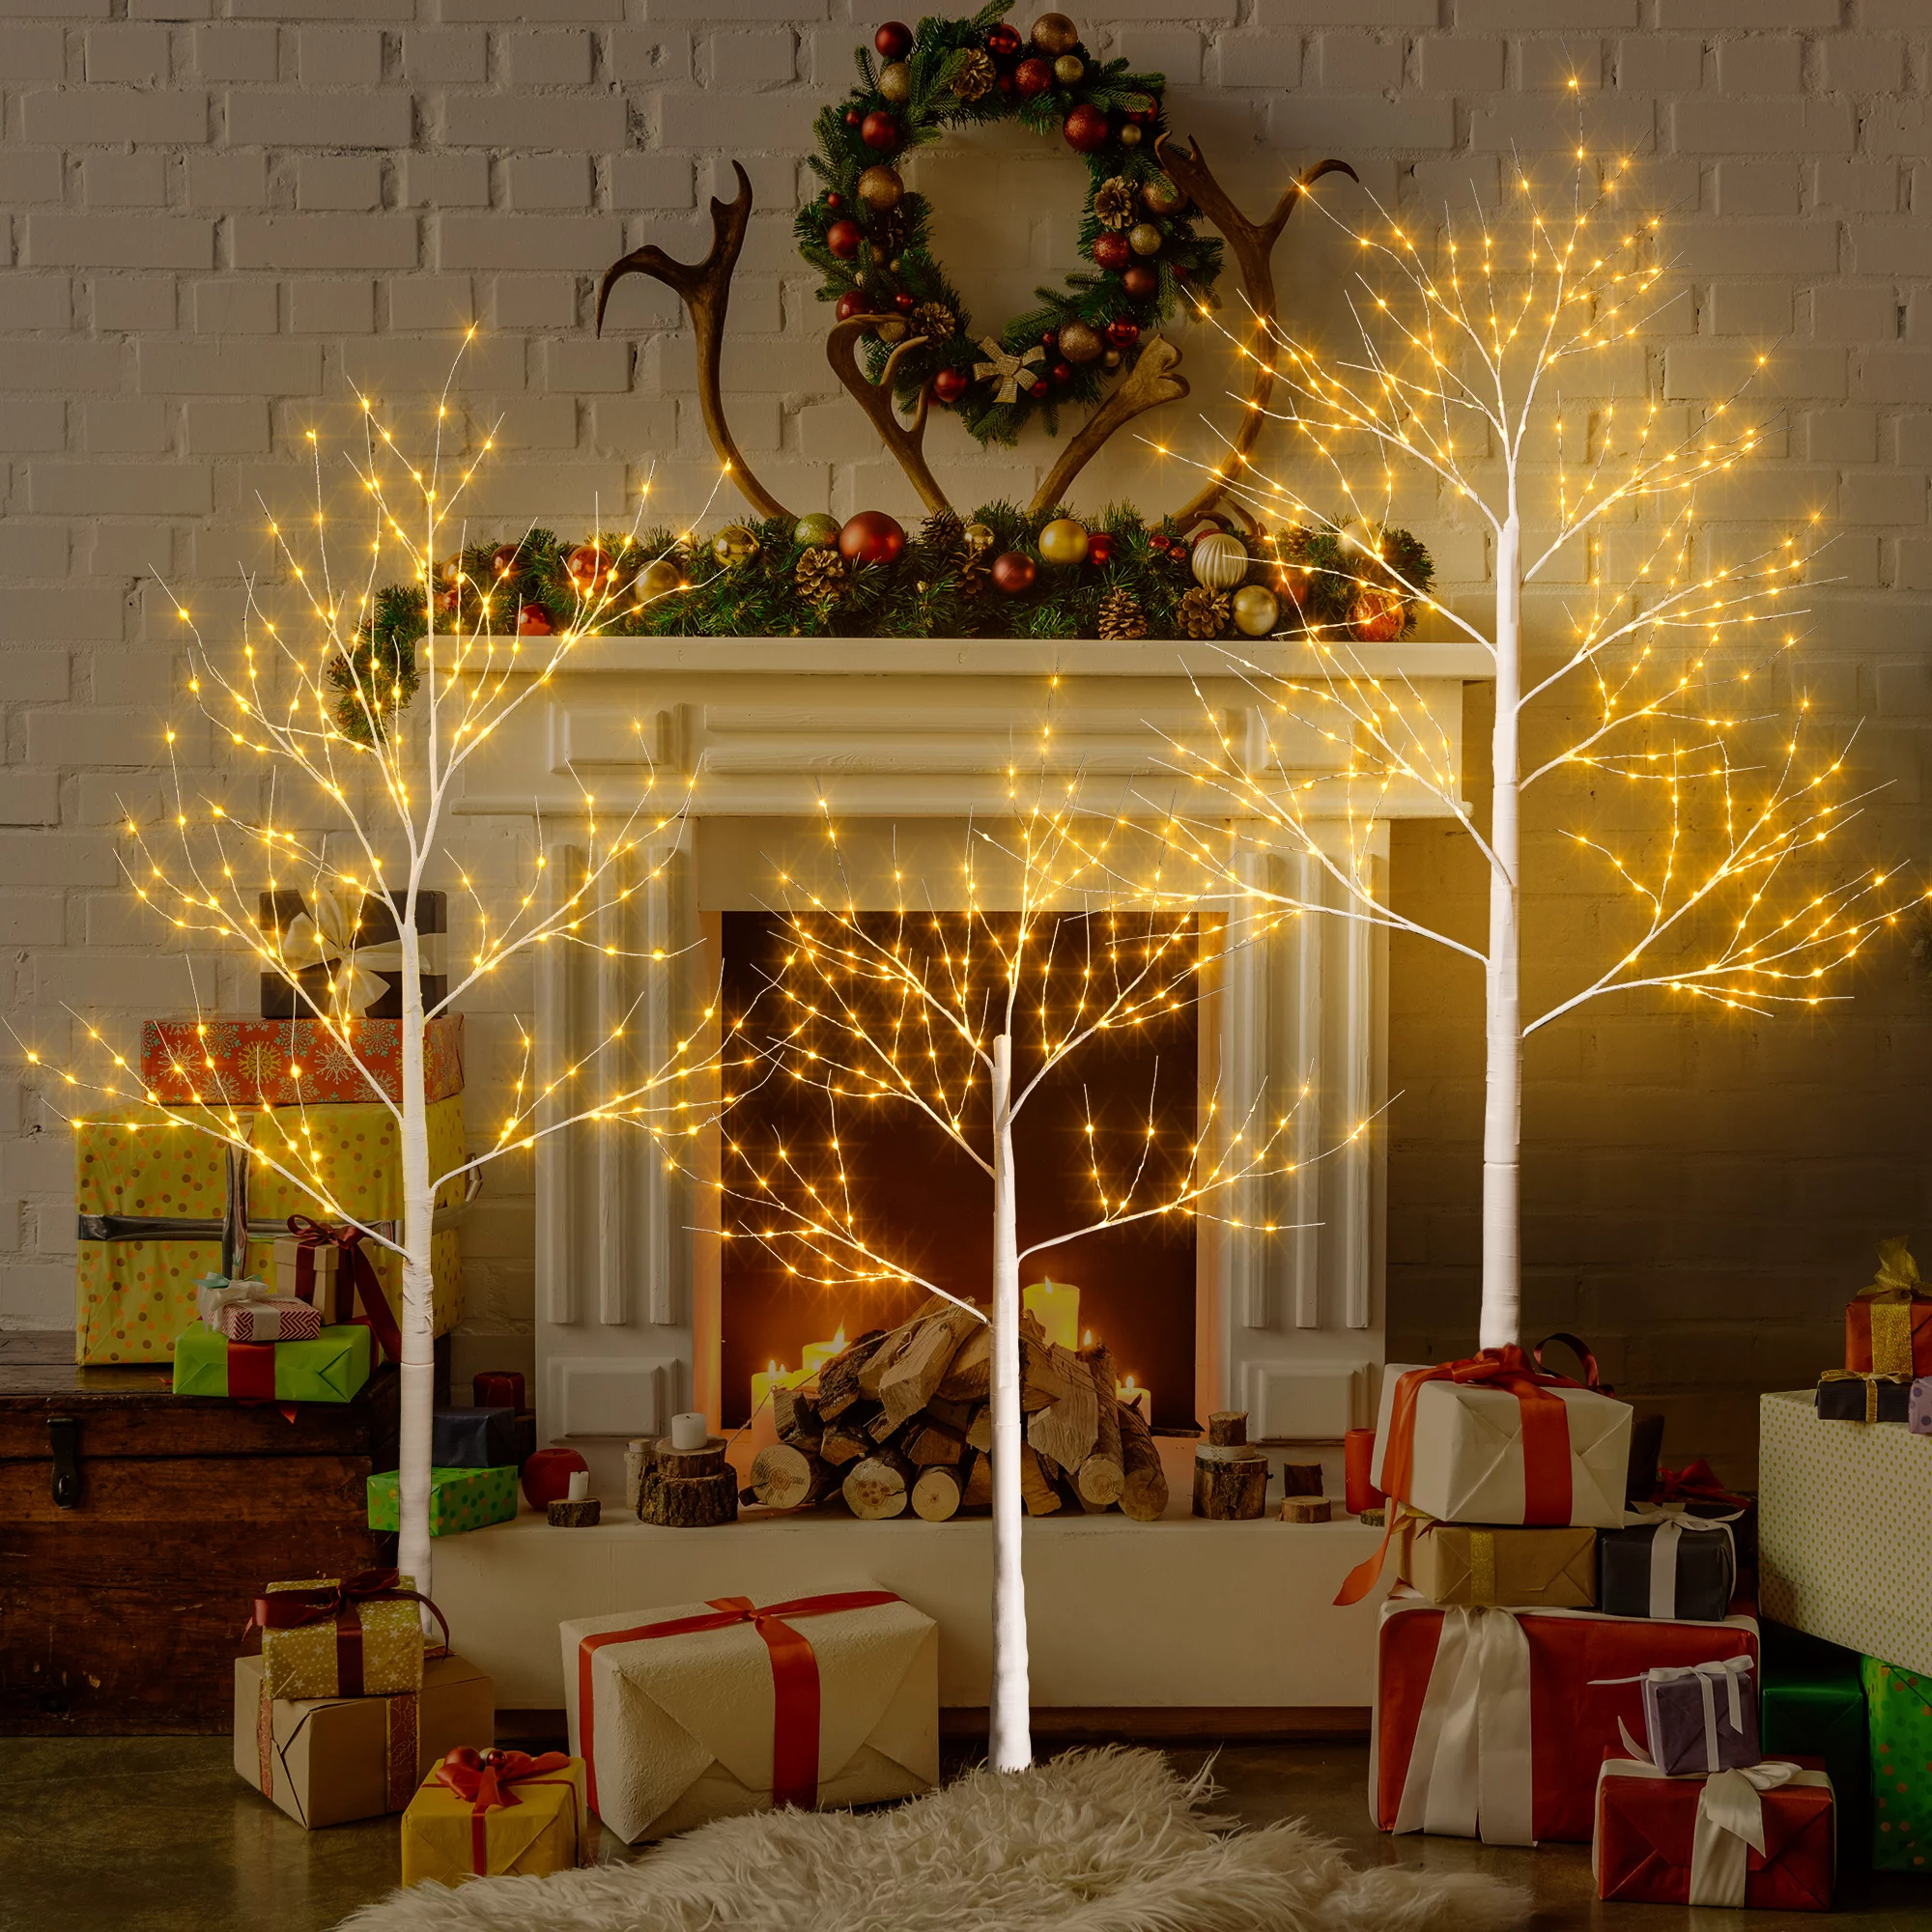 https://themarketdepot.com/wp-content/uploads/2023/11/Segmart-3PCS-White-Lighted-Christmas-Trees-650-LED-Artificial-Decorations-Home-Christmas-Tree-with-Stand-and-Timer_37bc38e2-5e88-497d-9f74-6d94378ca5a0.ed8bd45f0b631eac6e8de083ce0384bf.webp